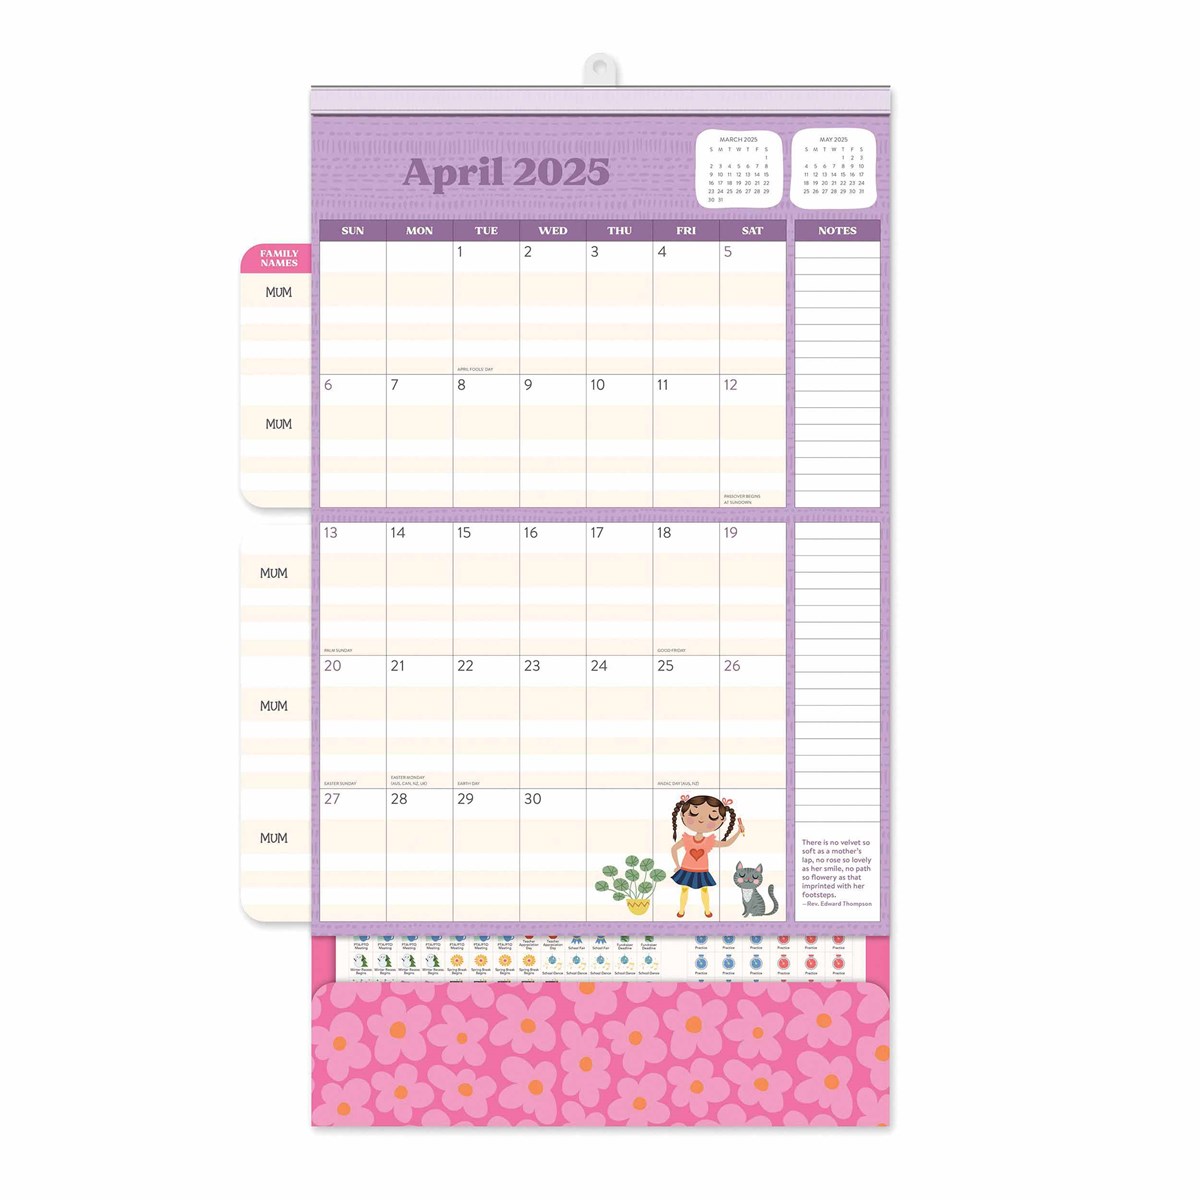 2025 Mom Do It All Family Planner - Deluxe Wall Calendar by Orange Circle Studio